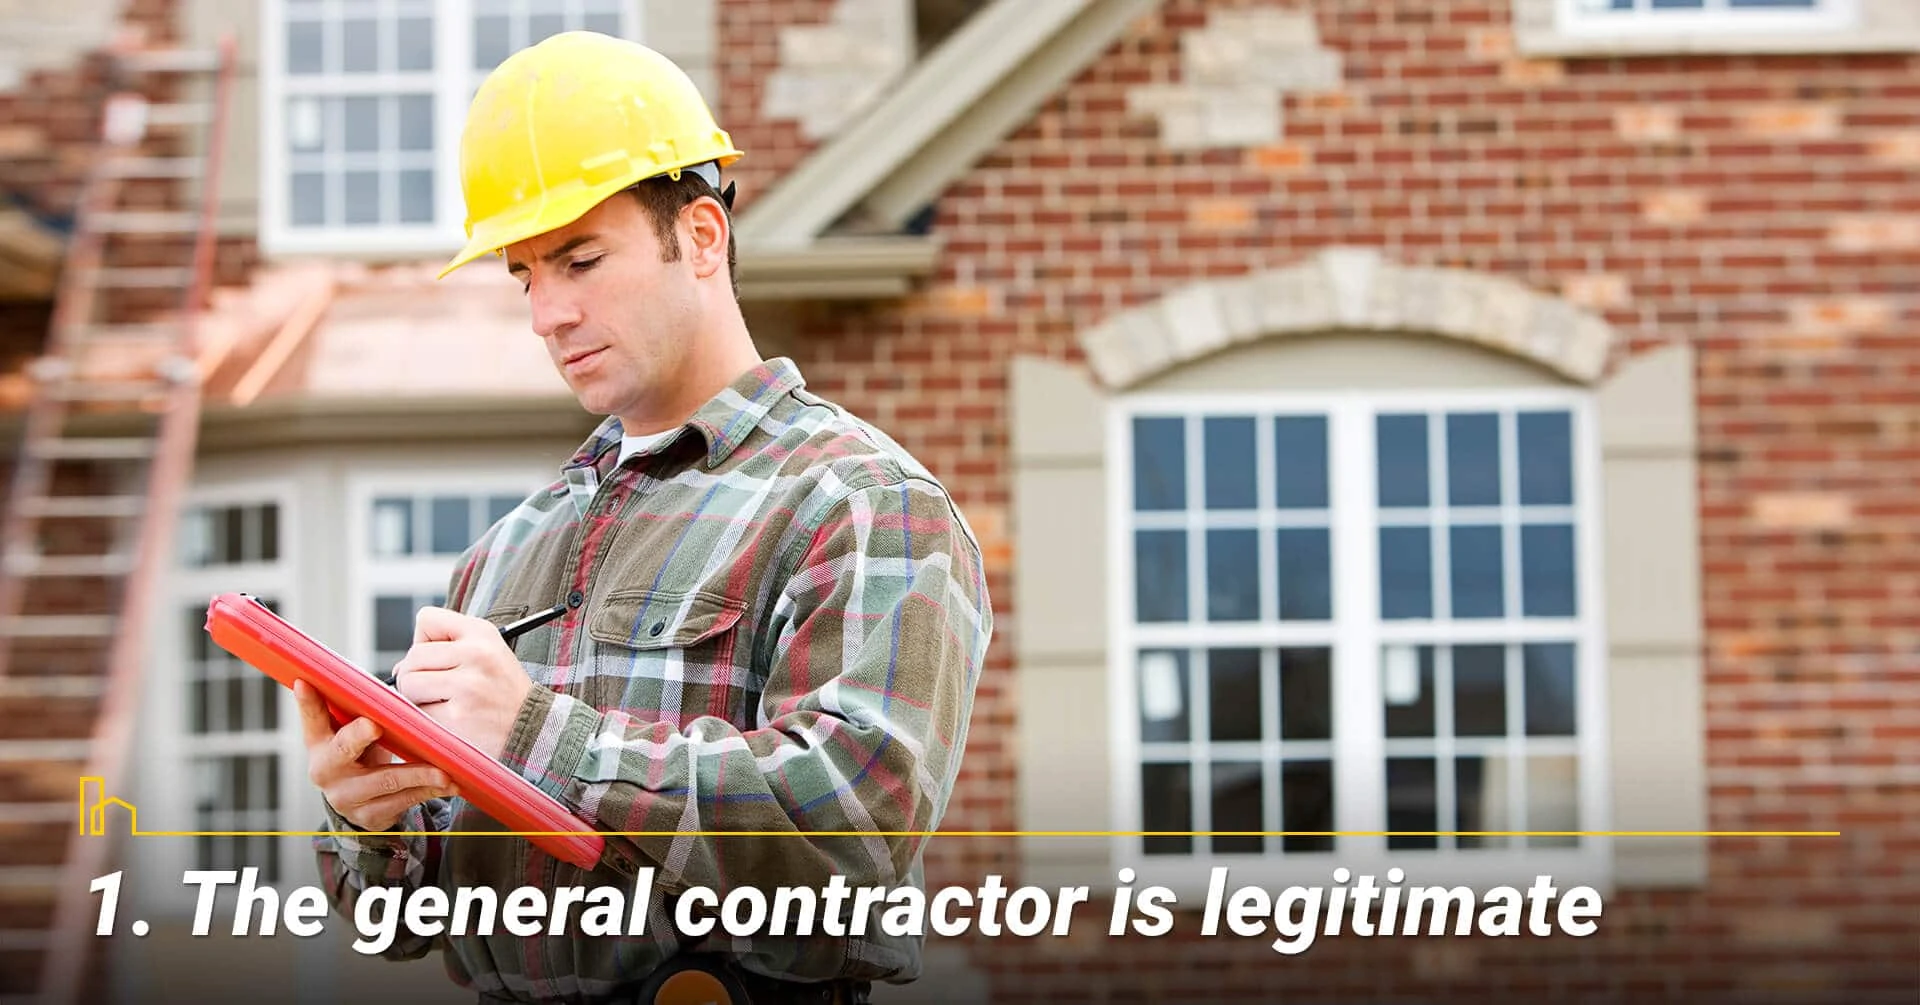 The general contractor is legitimate, get the right contractor